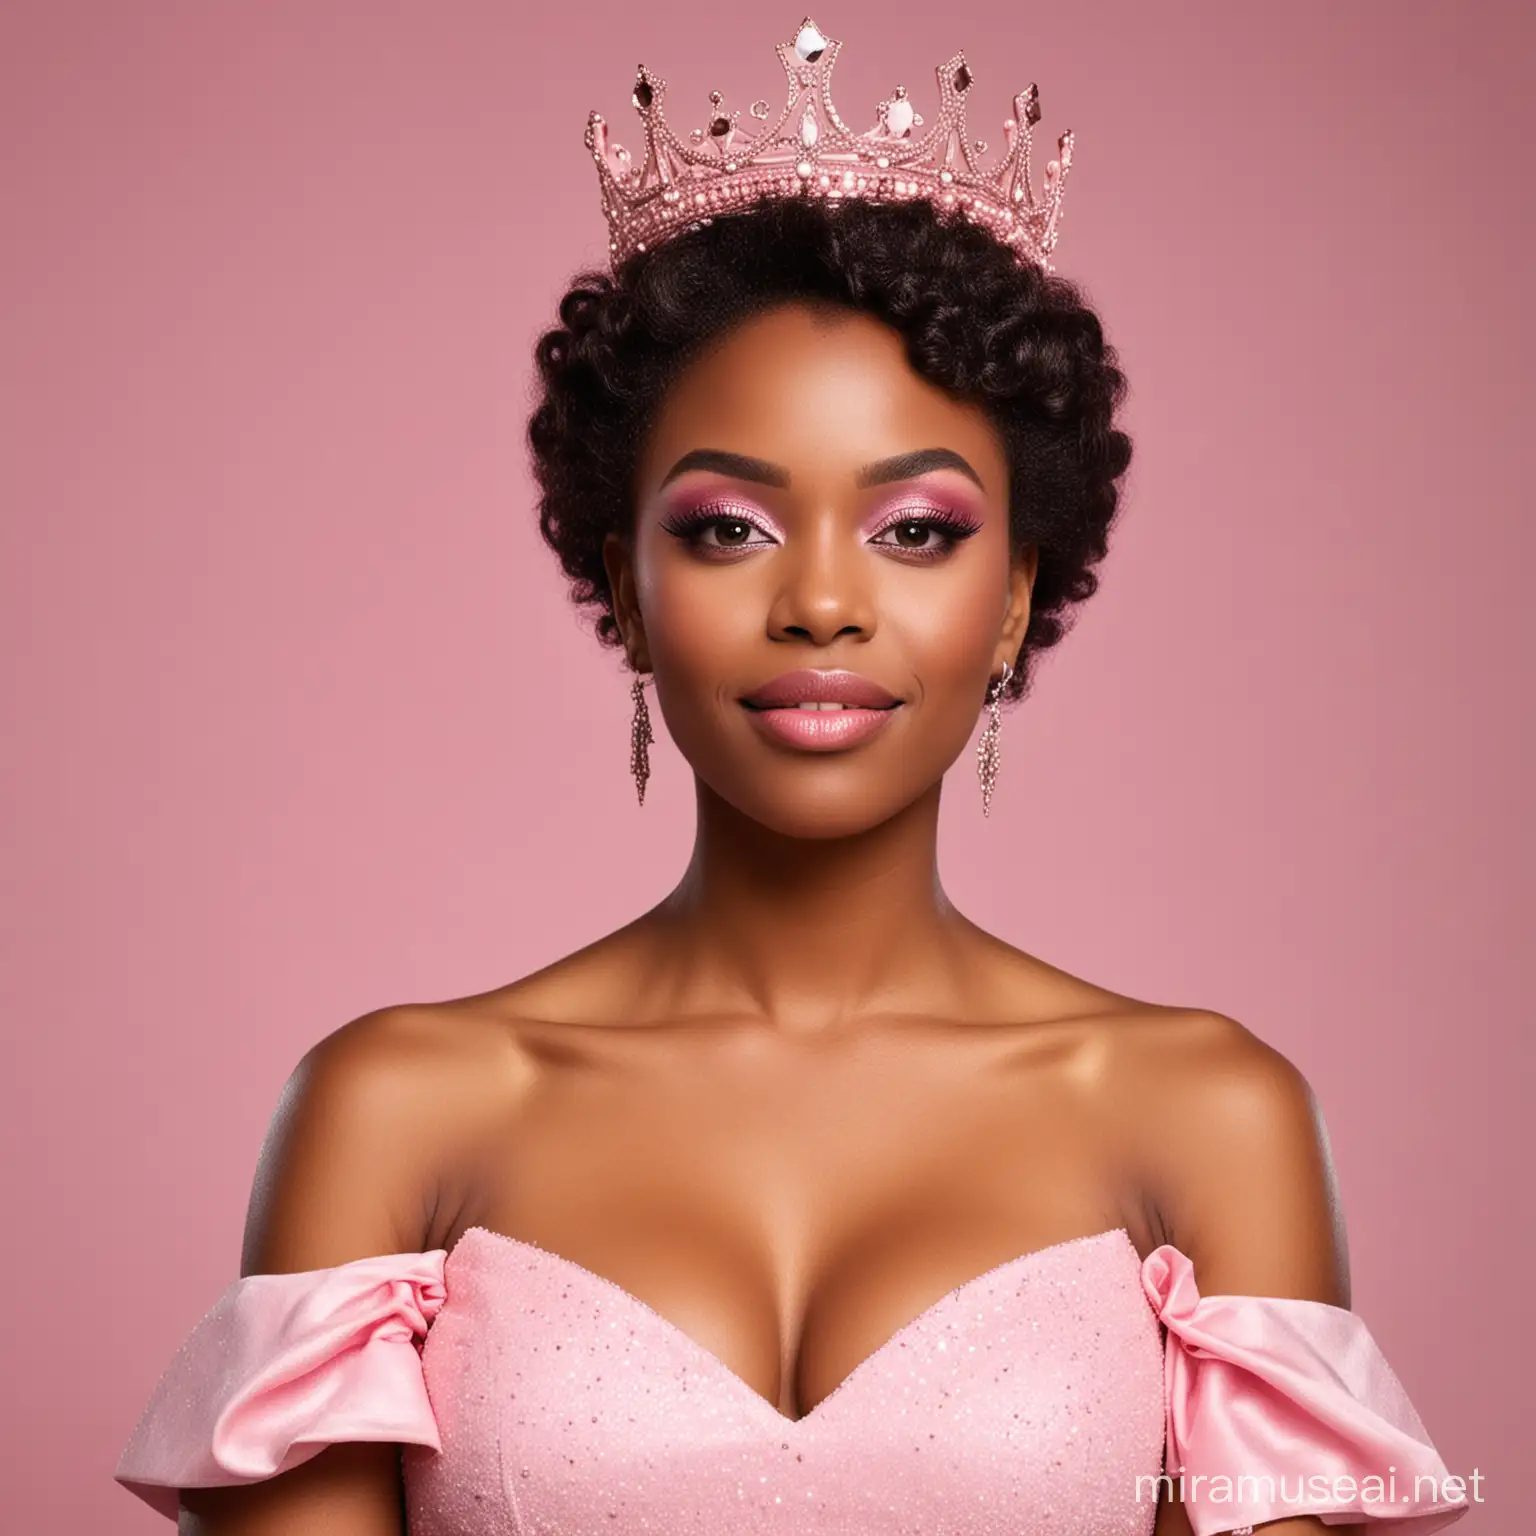 Glamorous African American Woman Celebrating Birthday in Pink Dress with Crown and Glamour Makeup